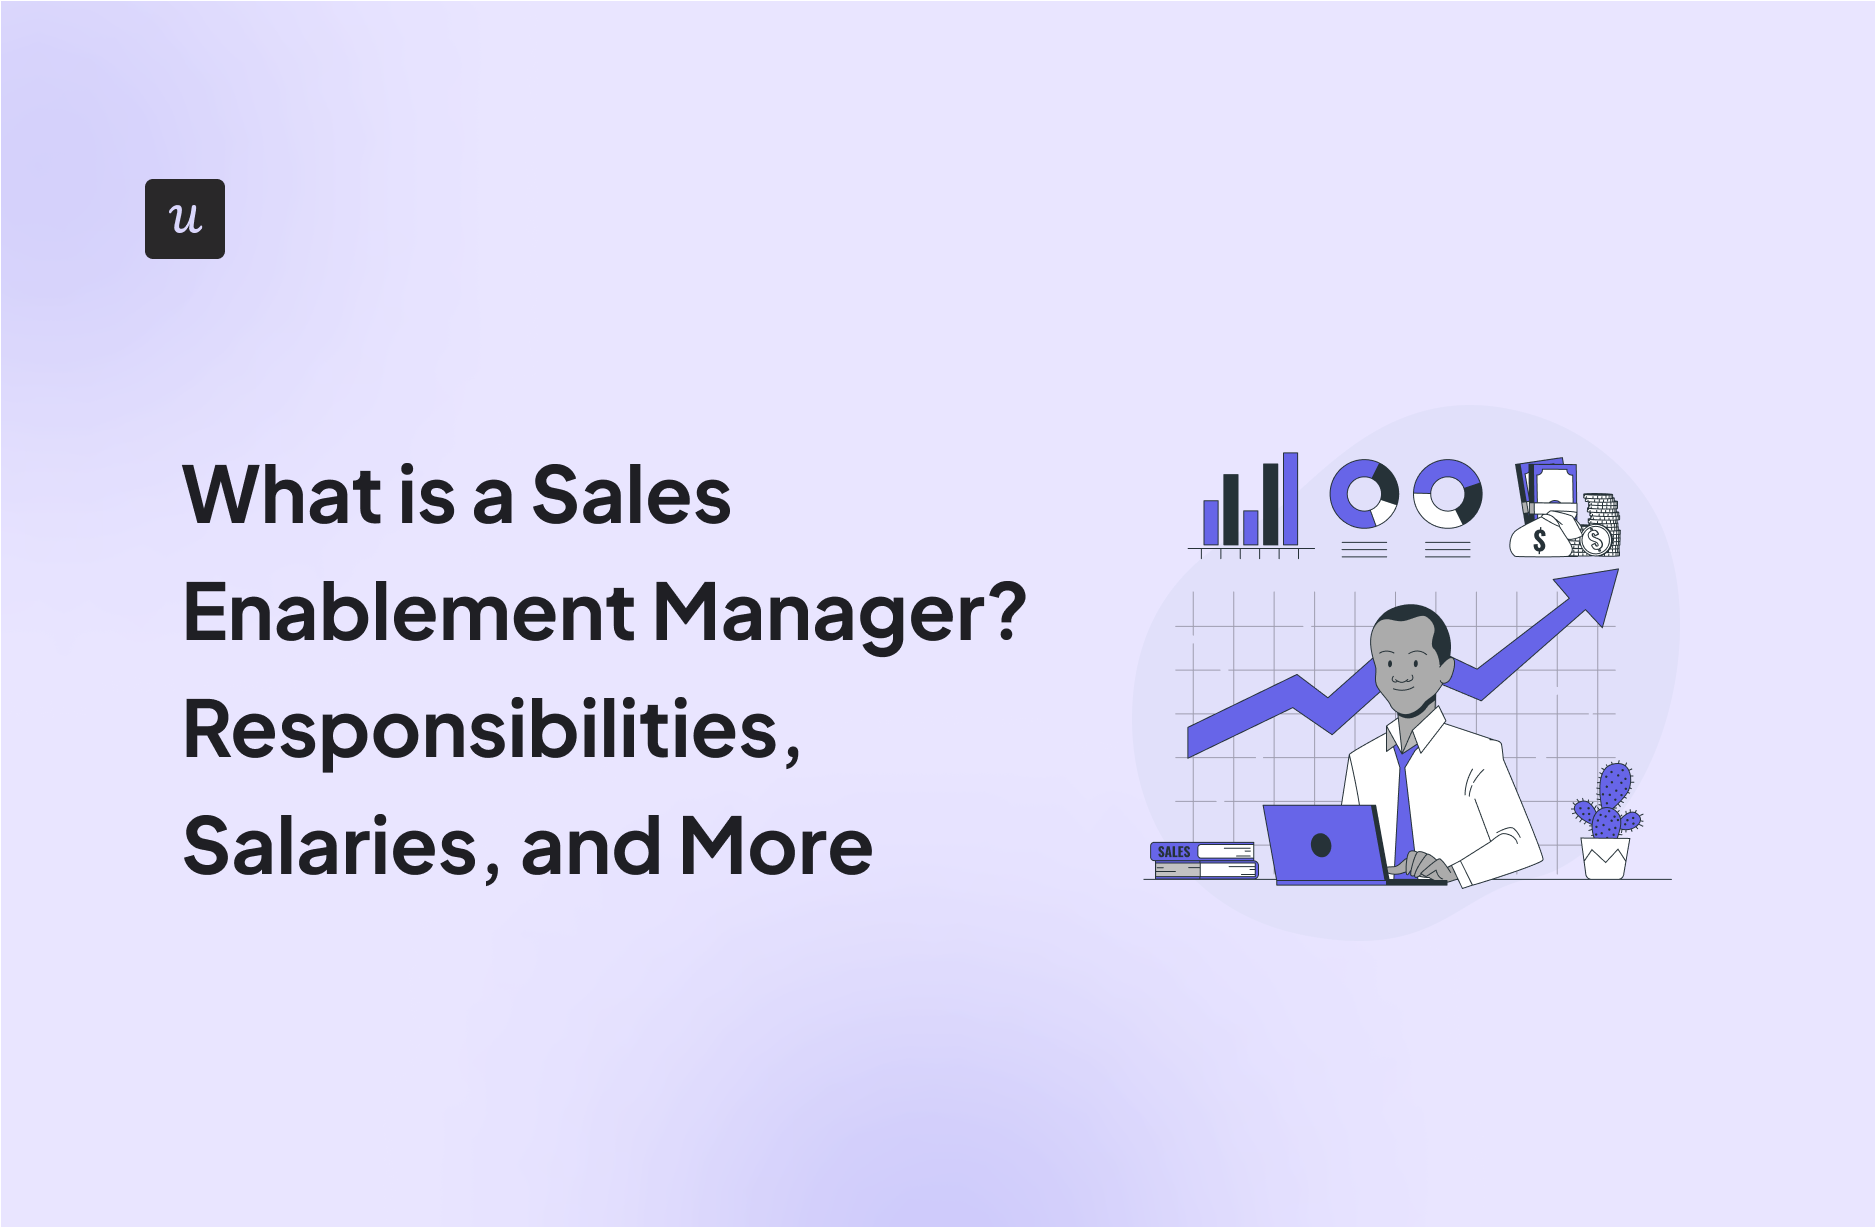 What is a Sales Enablement Manager? Responsibilities, Salaries, and More